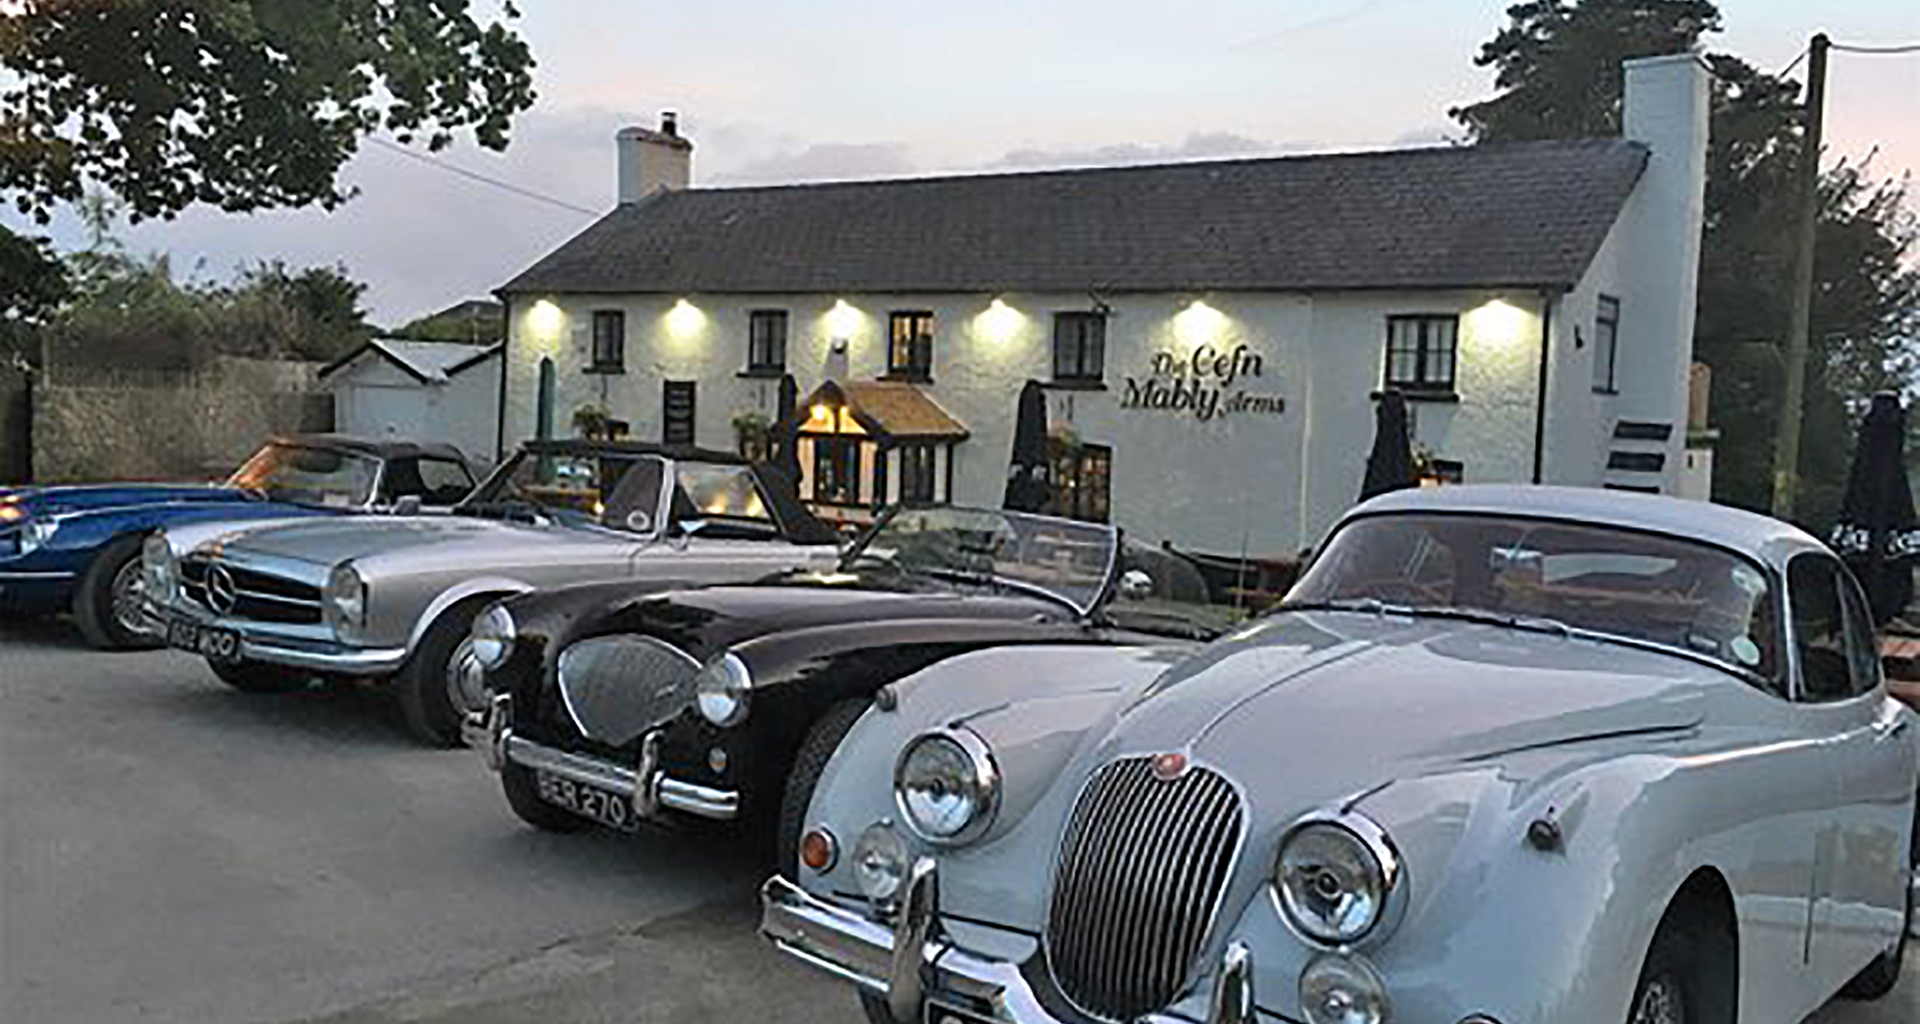 Cefn Mably Arms Classic Car Evening